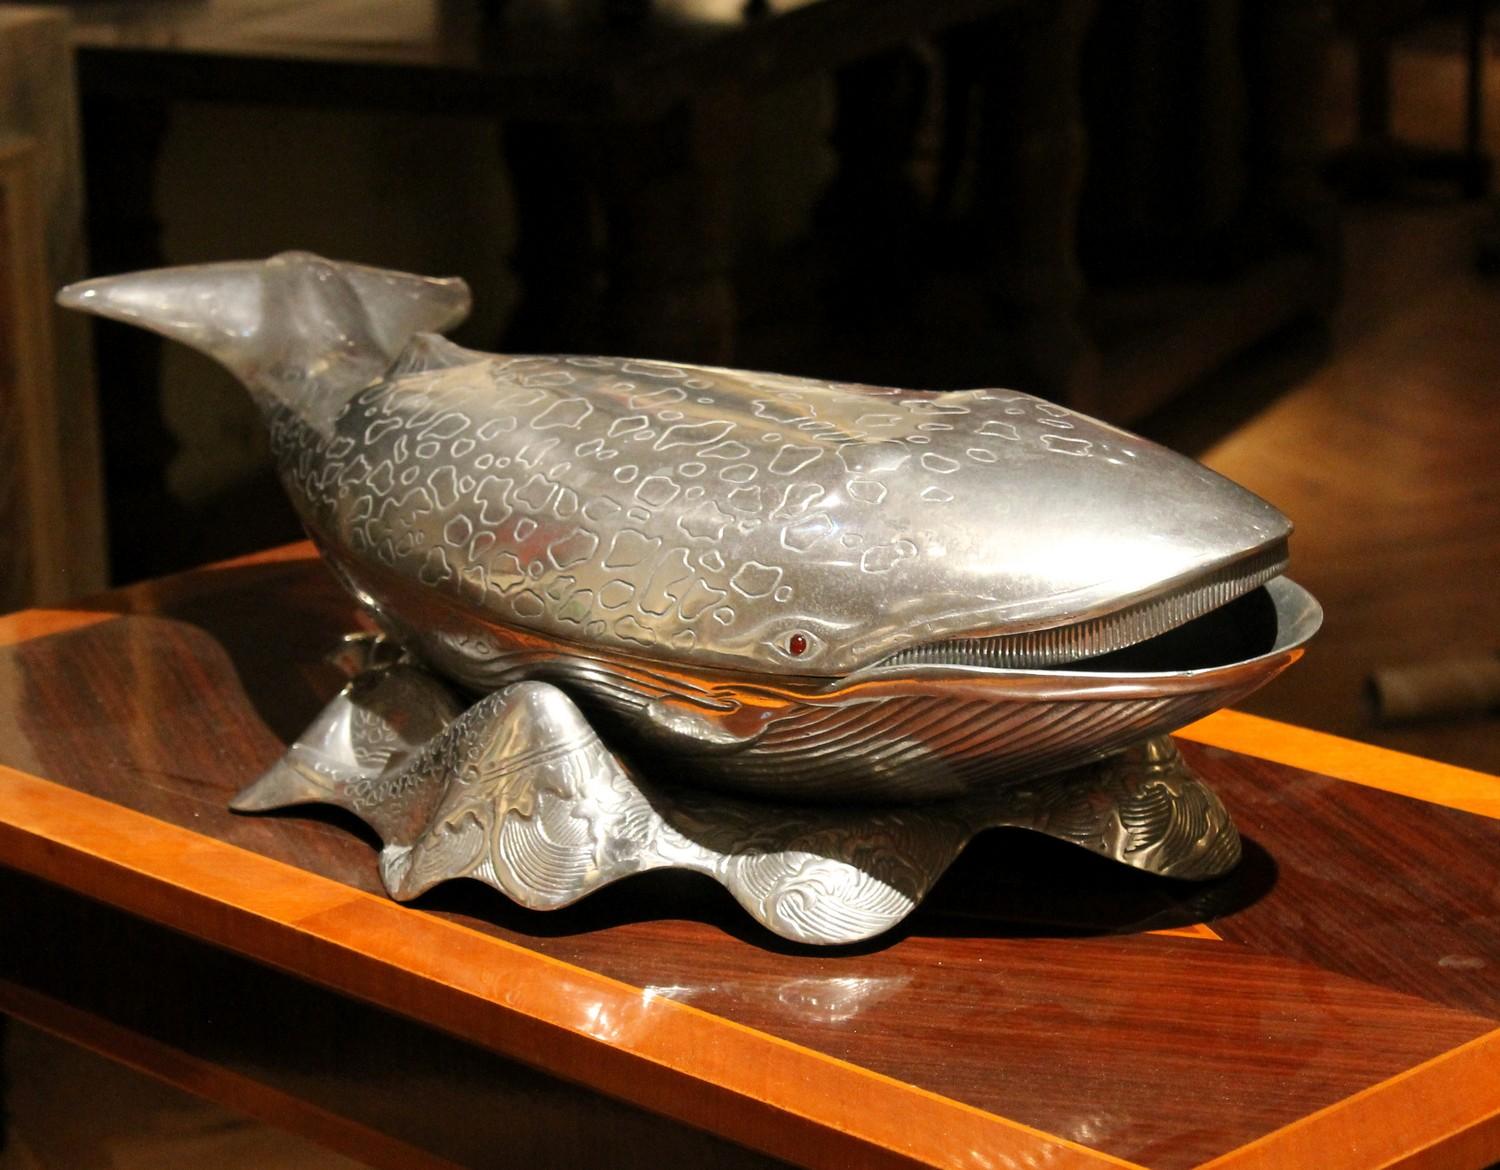 This large Mid-Century Modern (1979) cast aluminum Arthur Court Whale fish serving tray, ice bucket, or vine cooler will be the conversation piece at your next dinner party! Carefully crafted - casted and embossed in silvered metal- and incredible